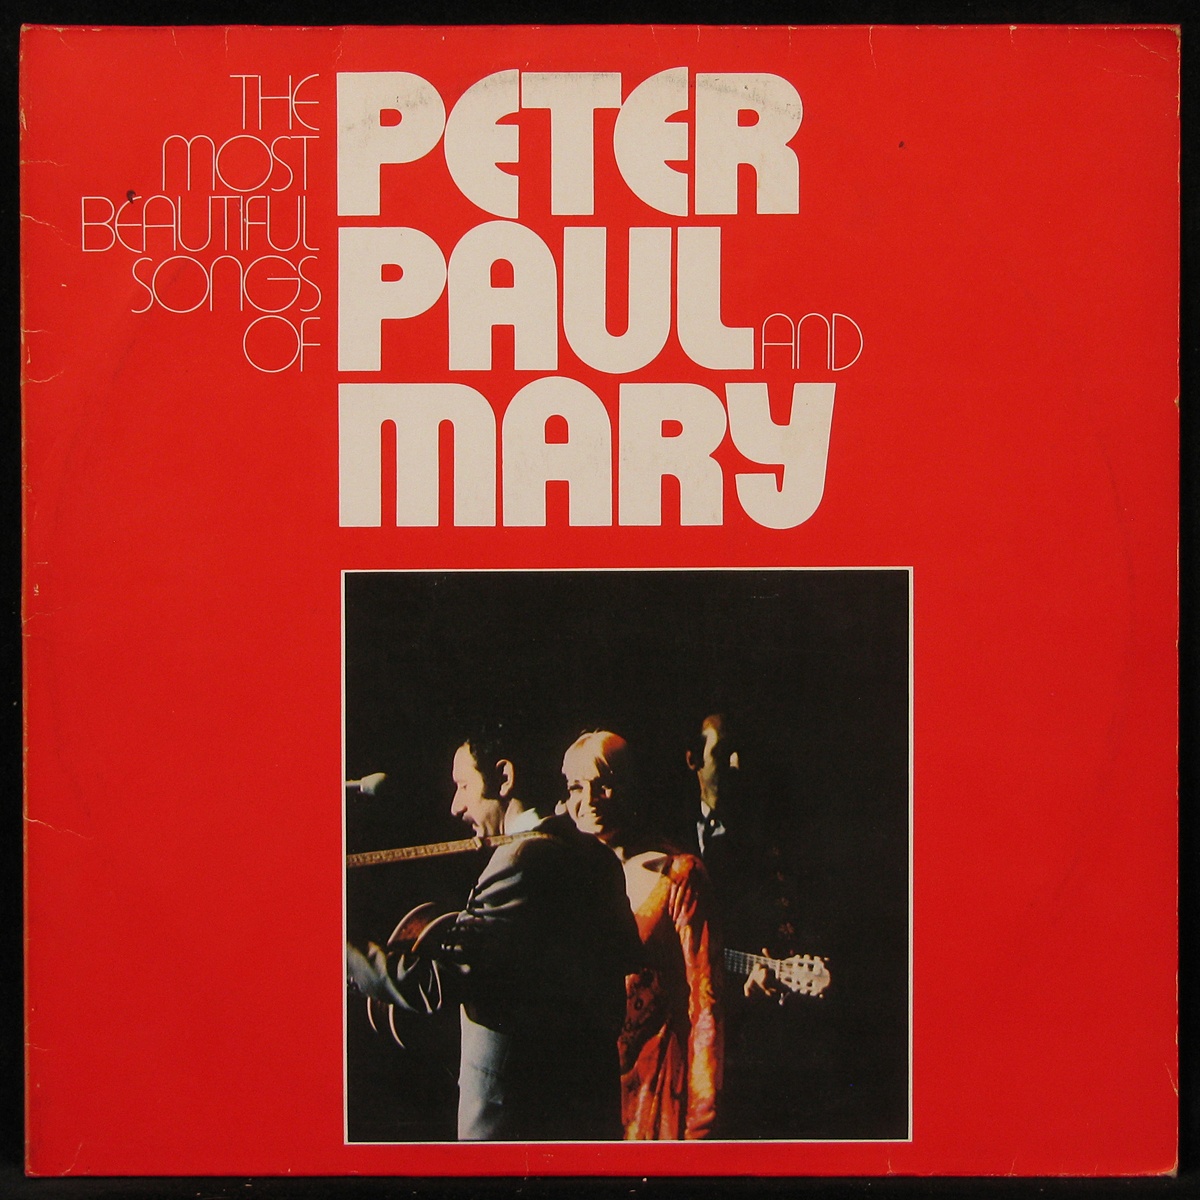 LP Peter, Paul And Mary — Most Beautiful Songs Of Peter, Paul And Mary (2LP) фото